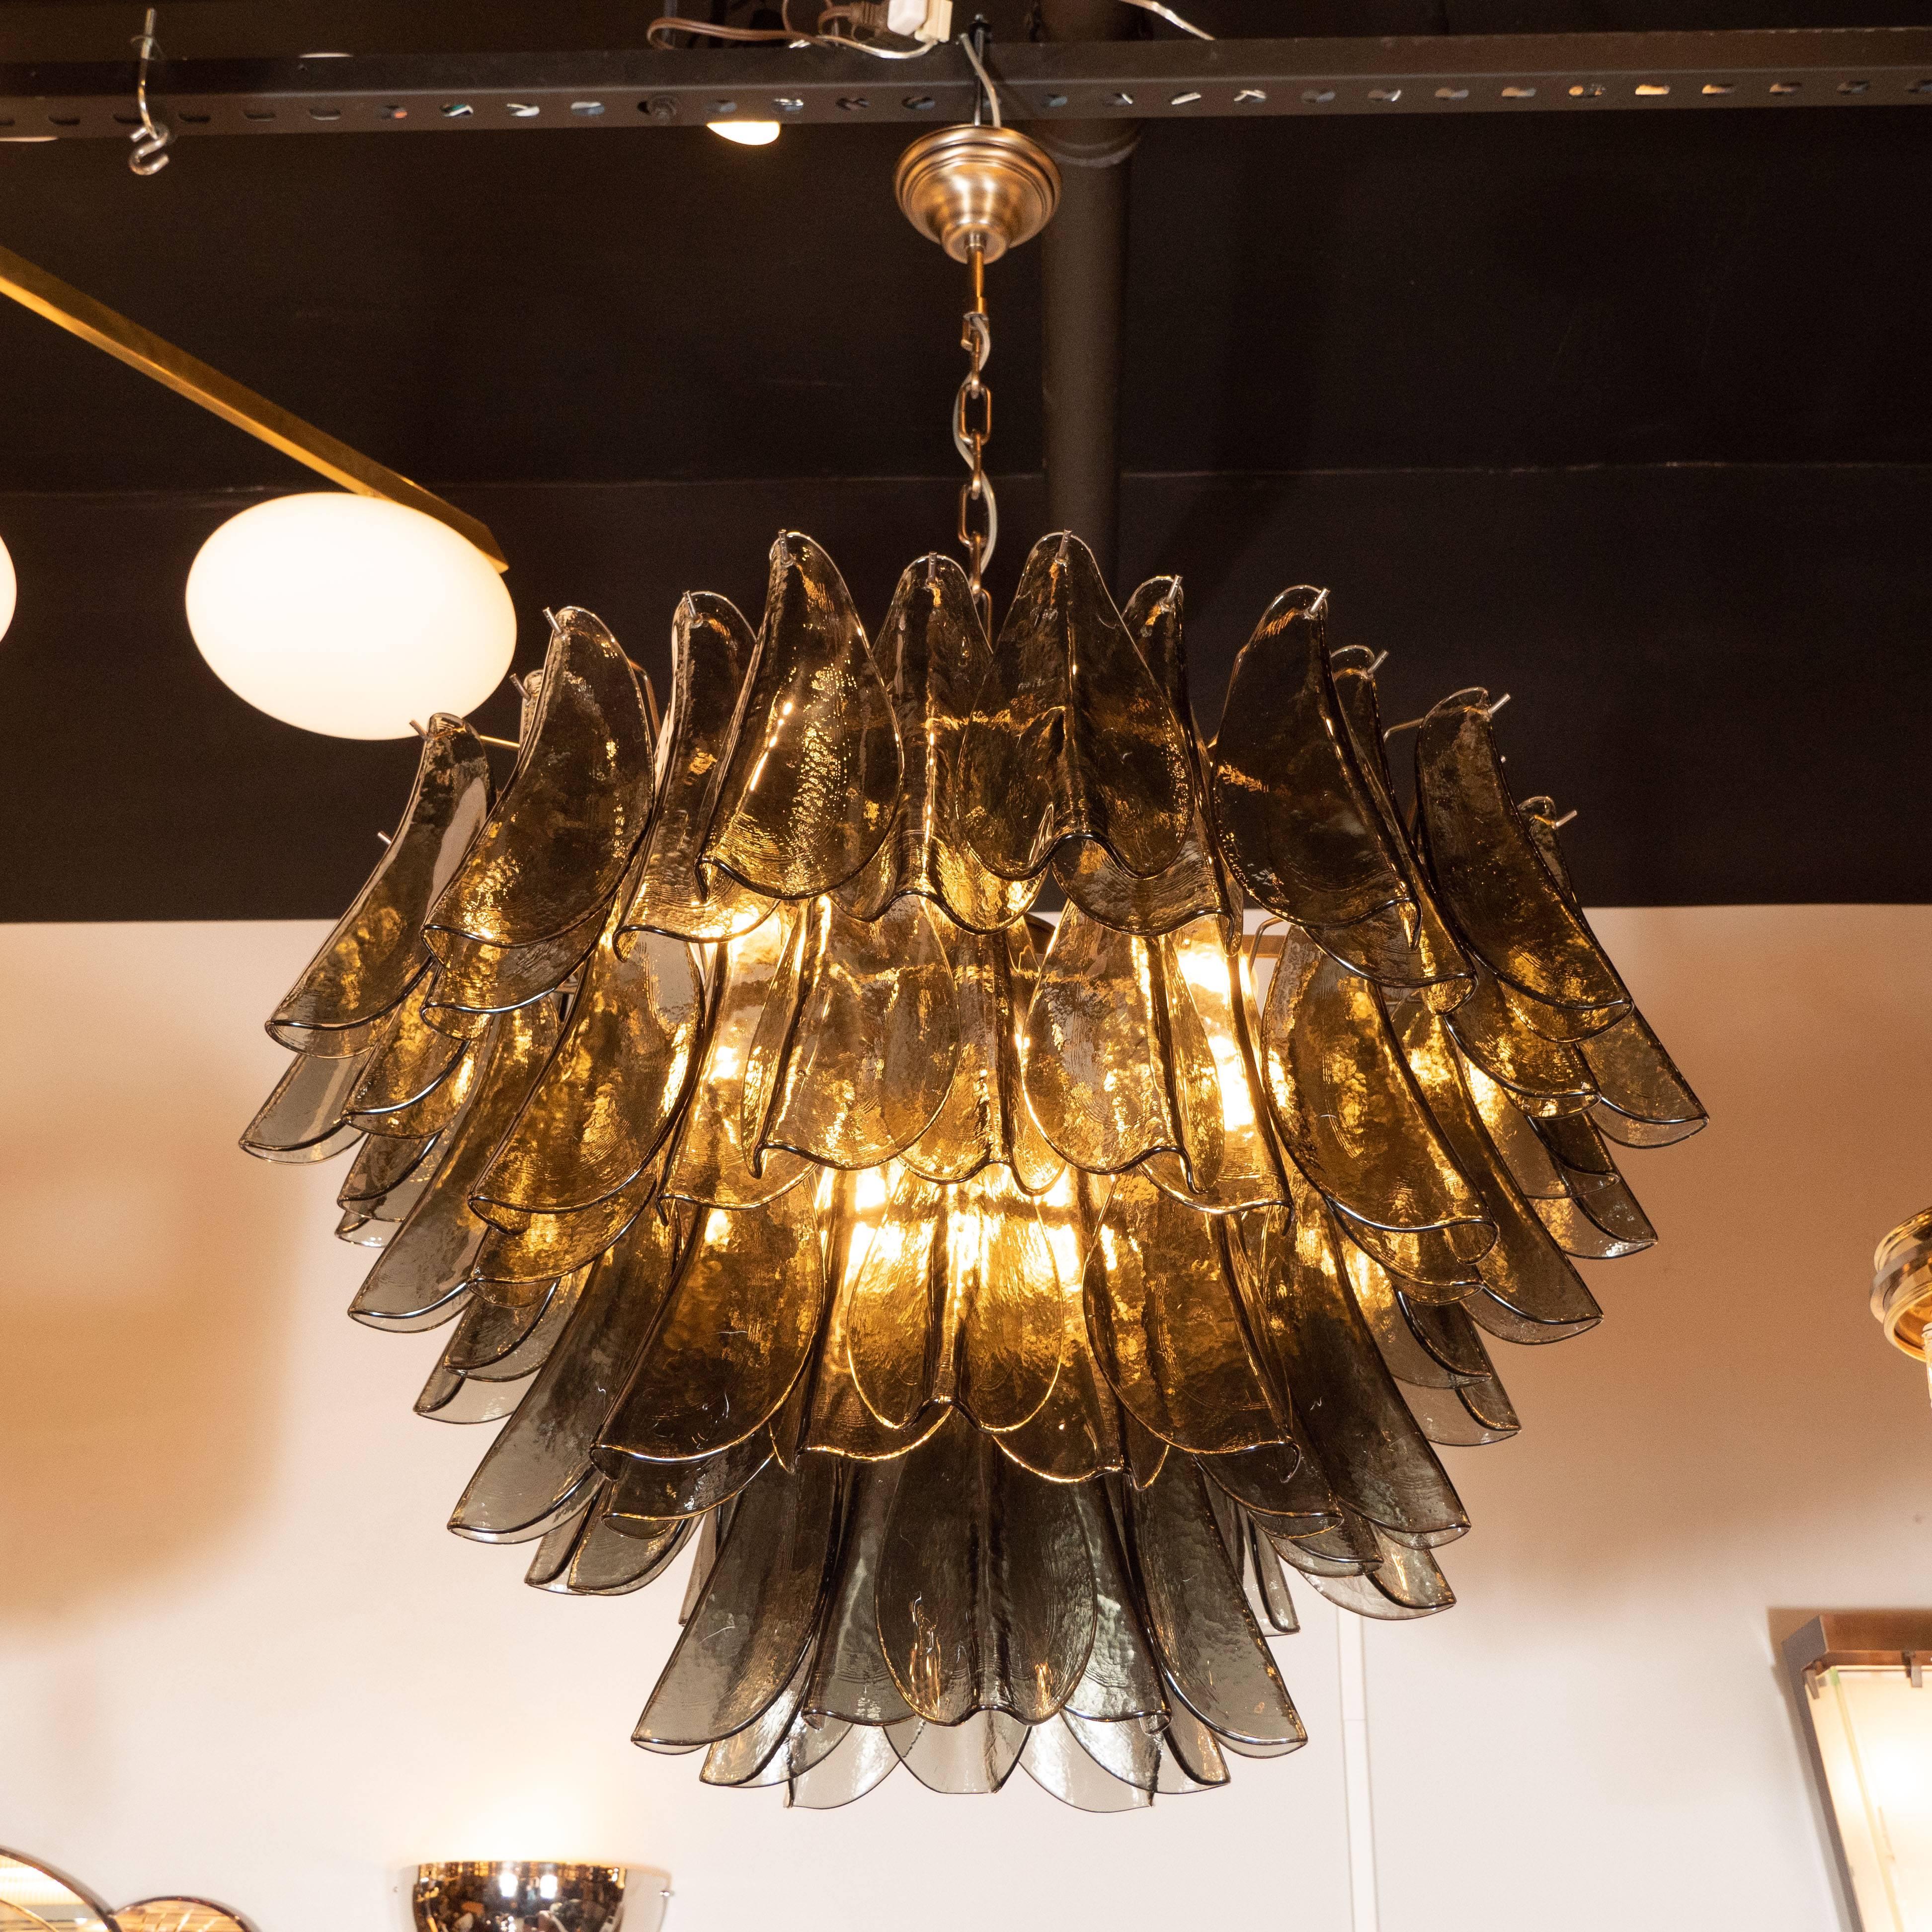 This refined and sophisticated chandelier was realized in Murano, Italy- the islands off the coast of Venice renowned for centuries for their superlative quality glass production. It offers an abundance of handblown Murano glass shades in a smoked